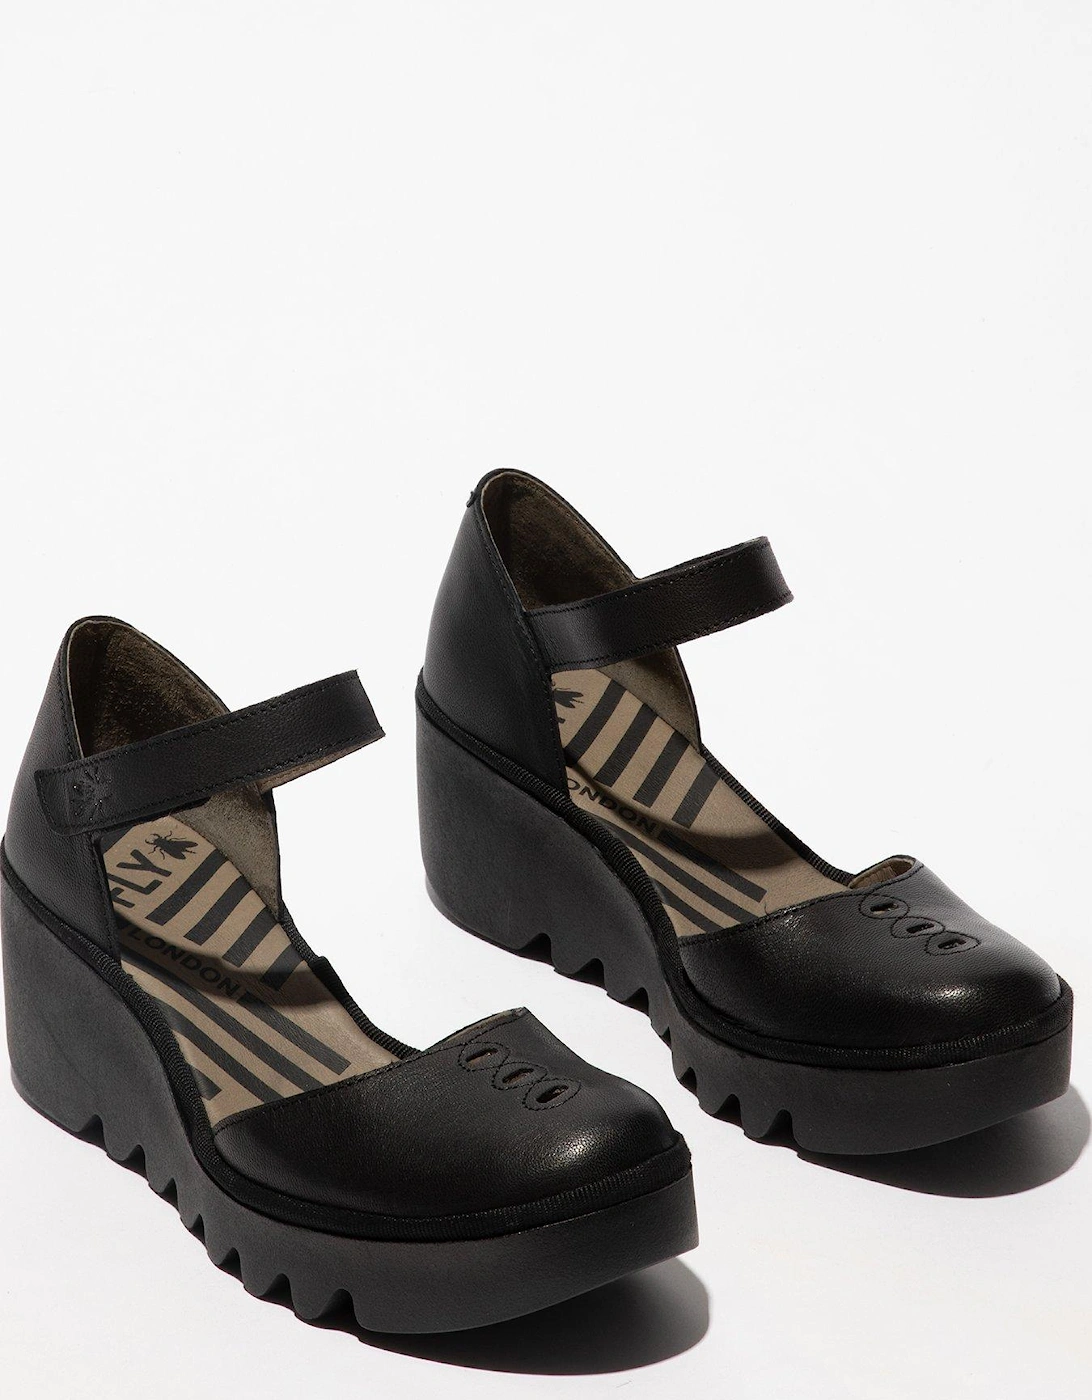 Biso Rounded Toe Leather Heeled Shoes - Black